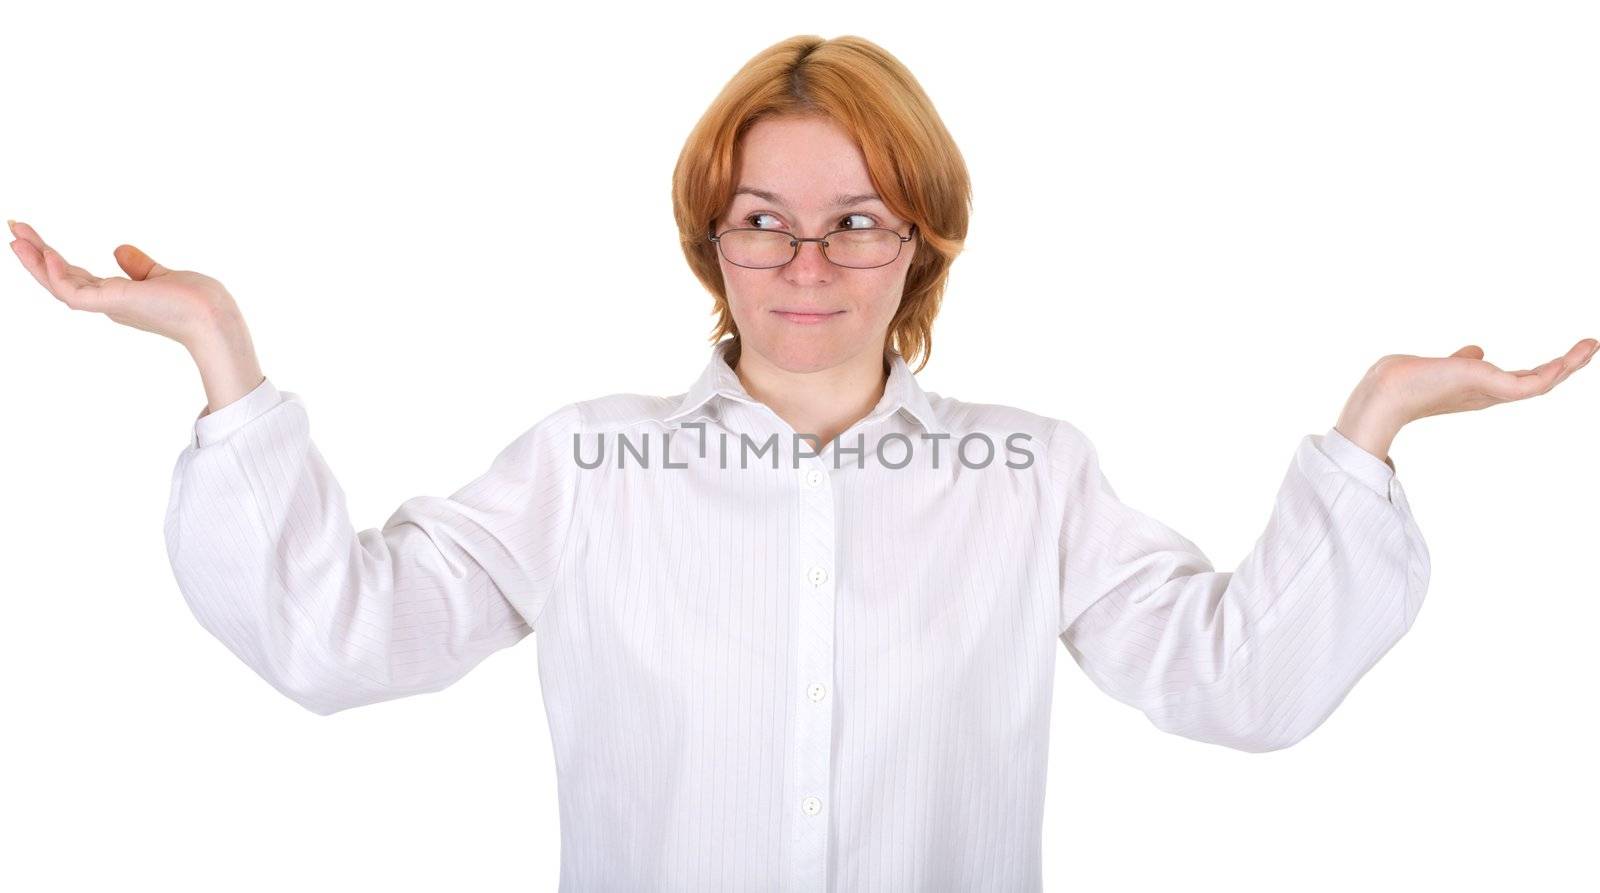 The woman in a white suit on a white background